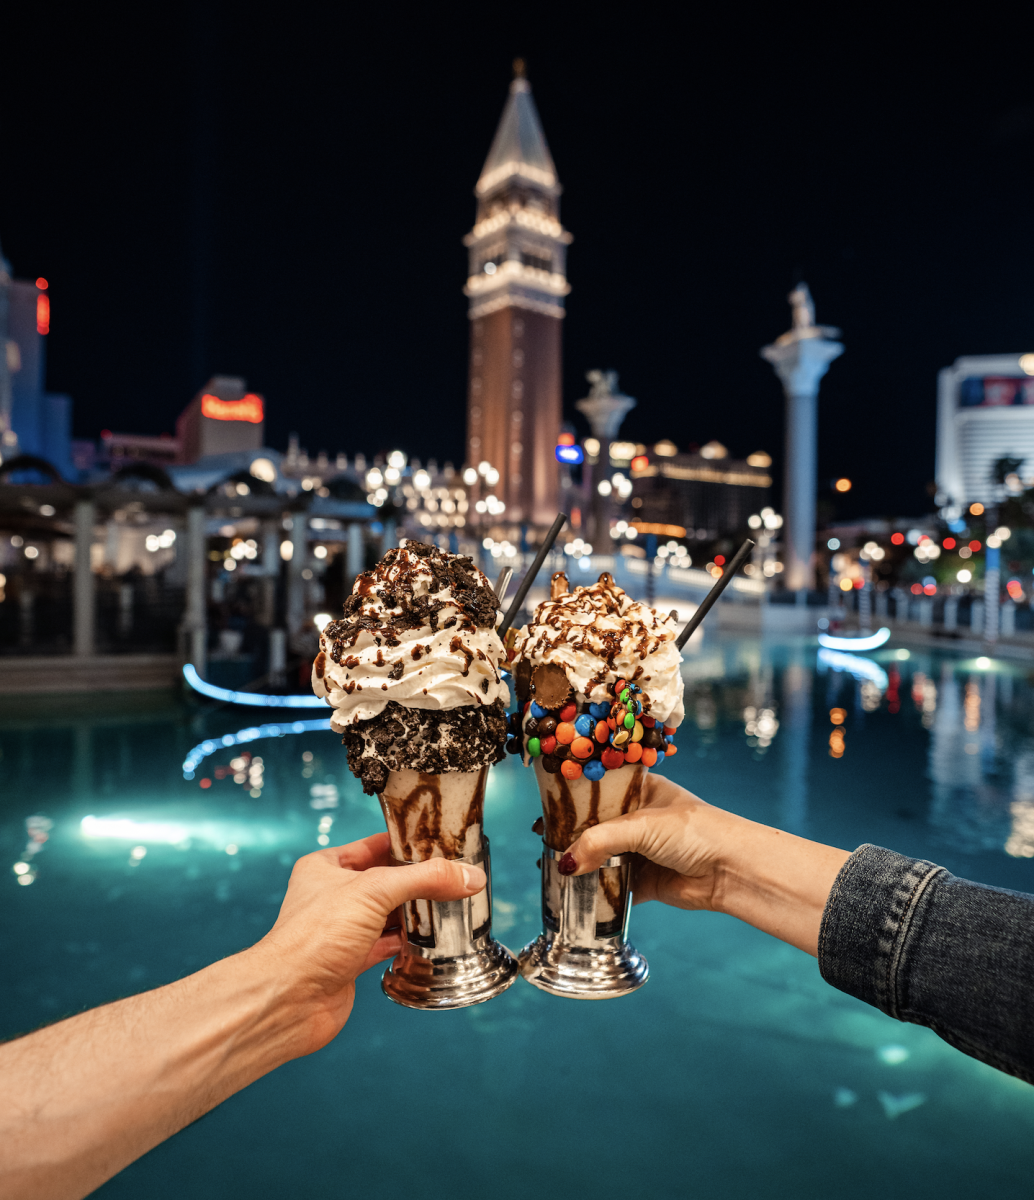 Las Vegas Photo Spots: 9 Places You Can't Miss - On The Road With Jen